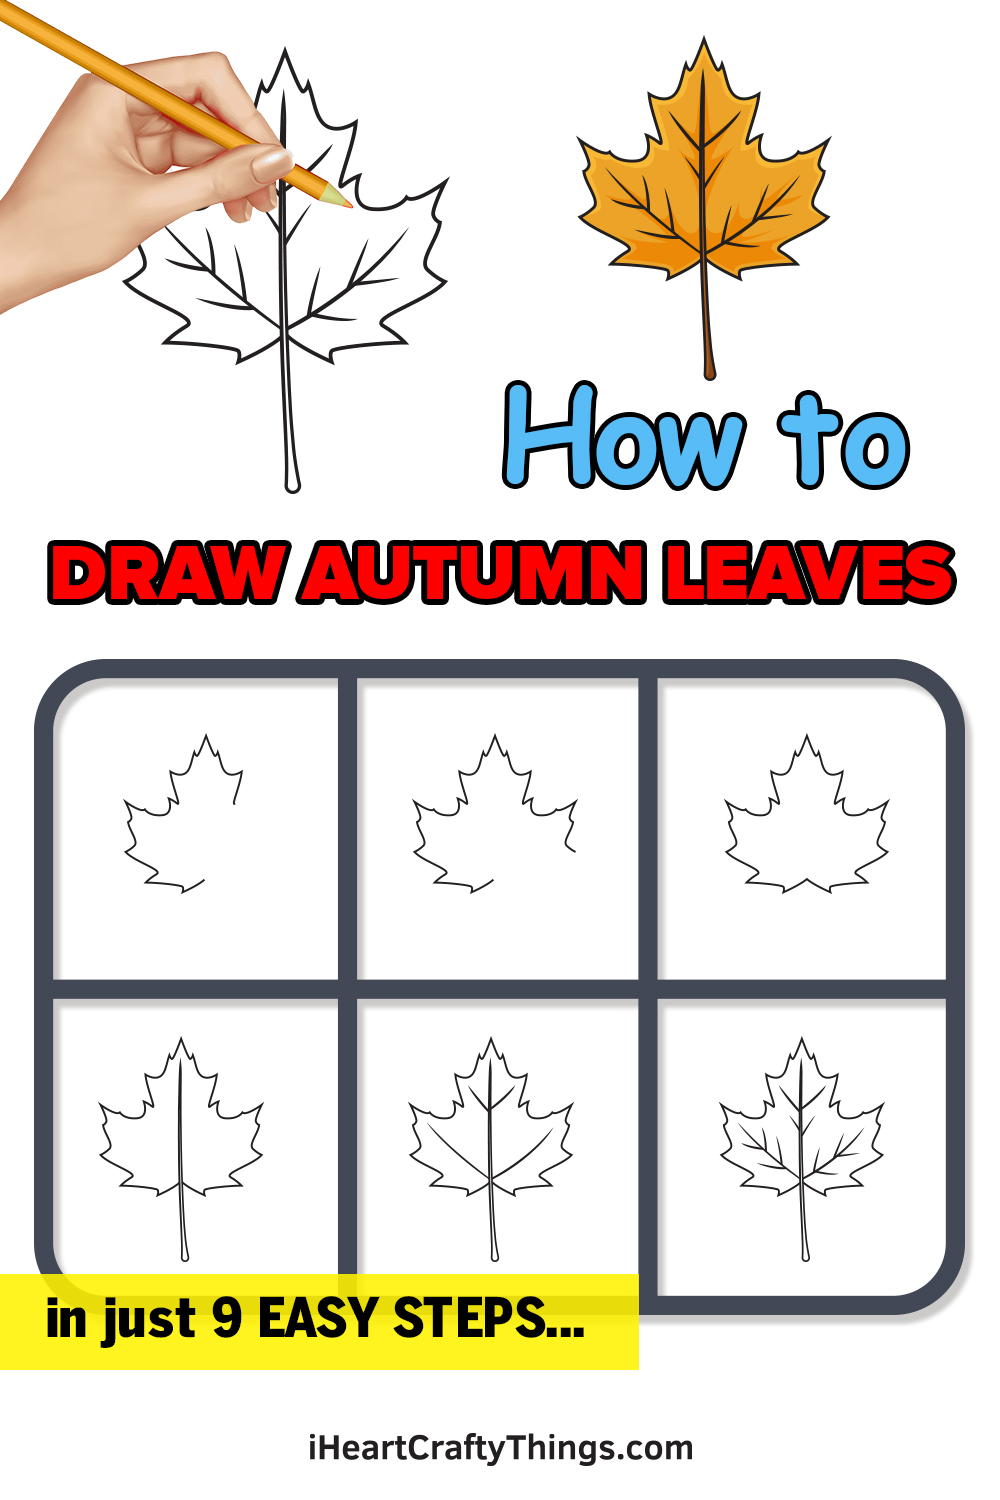 SPEED DRAWING: Autumn Leaf - YouTube